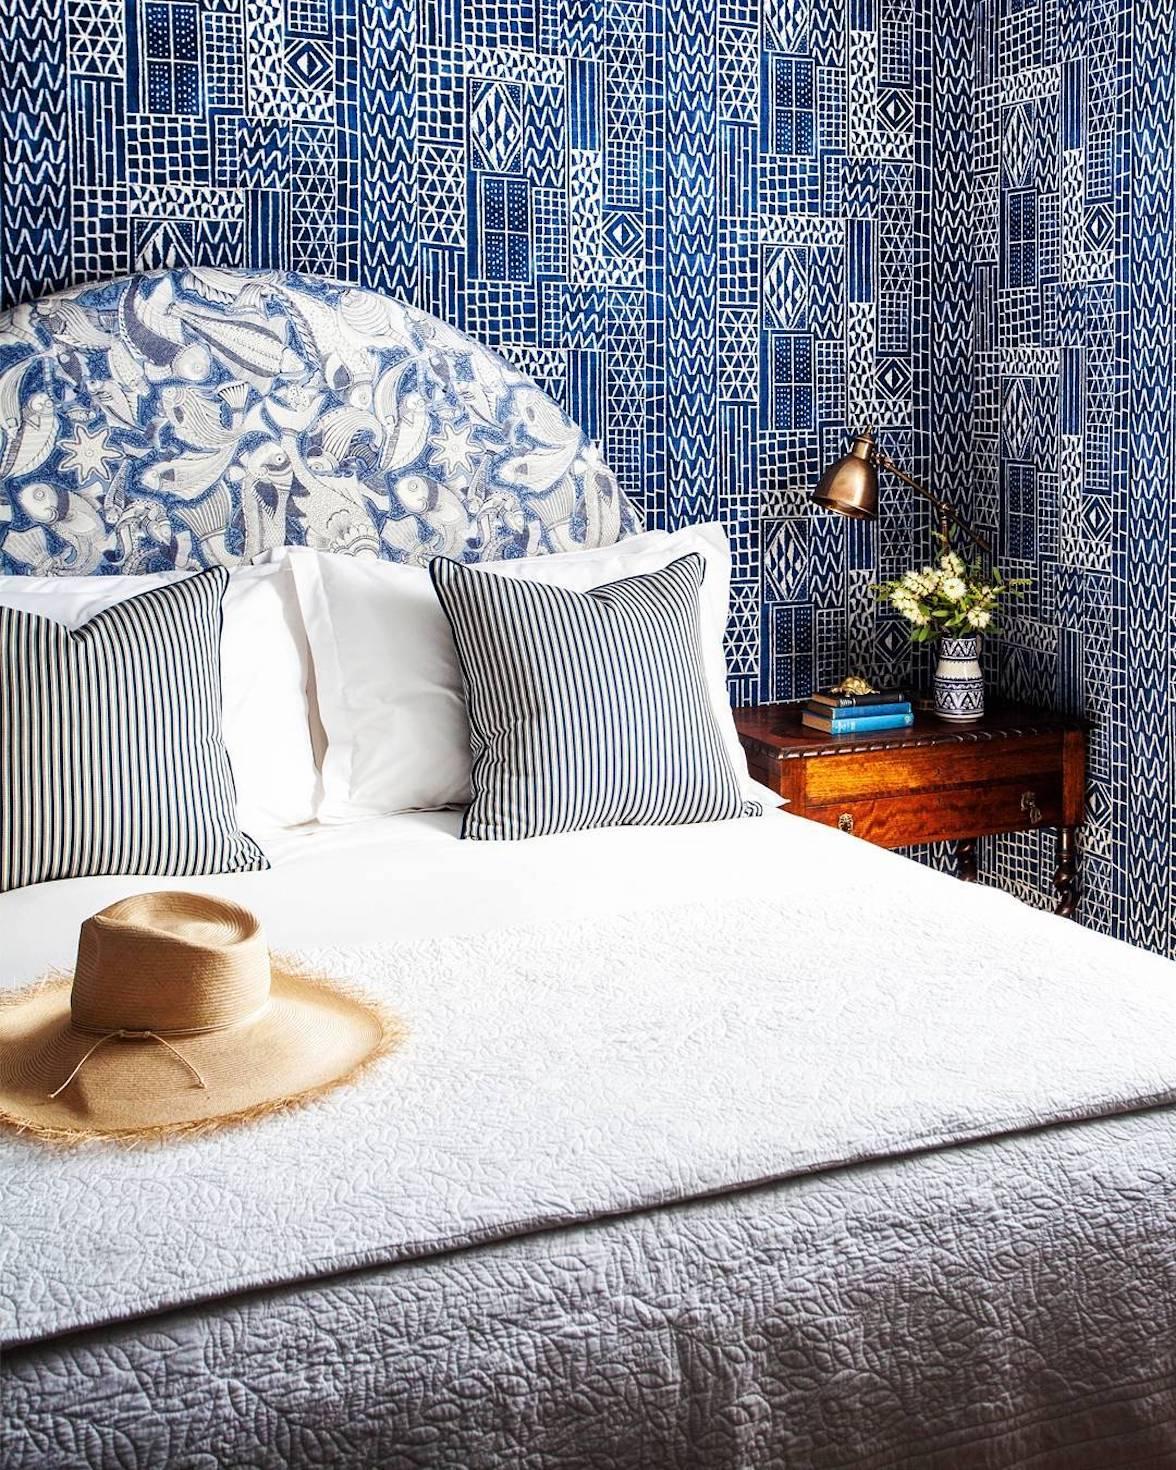 Hotels With The Most Beautiful Wallpaper